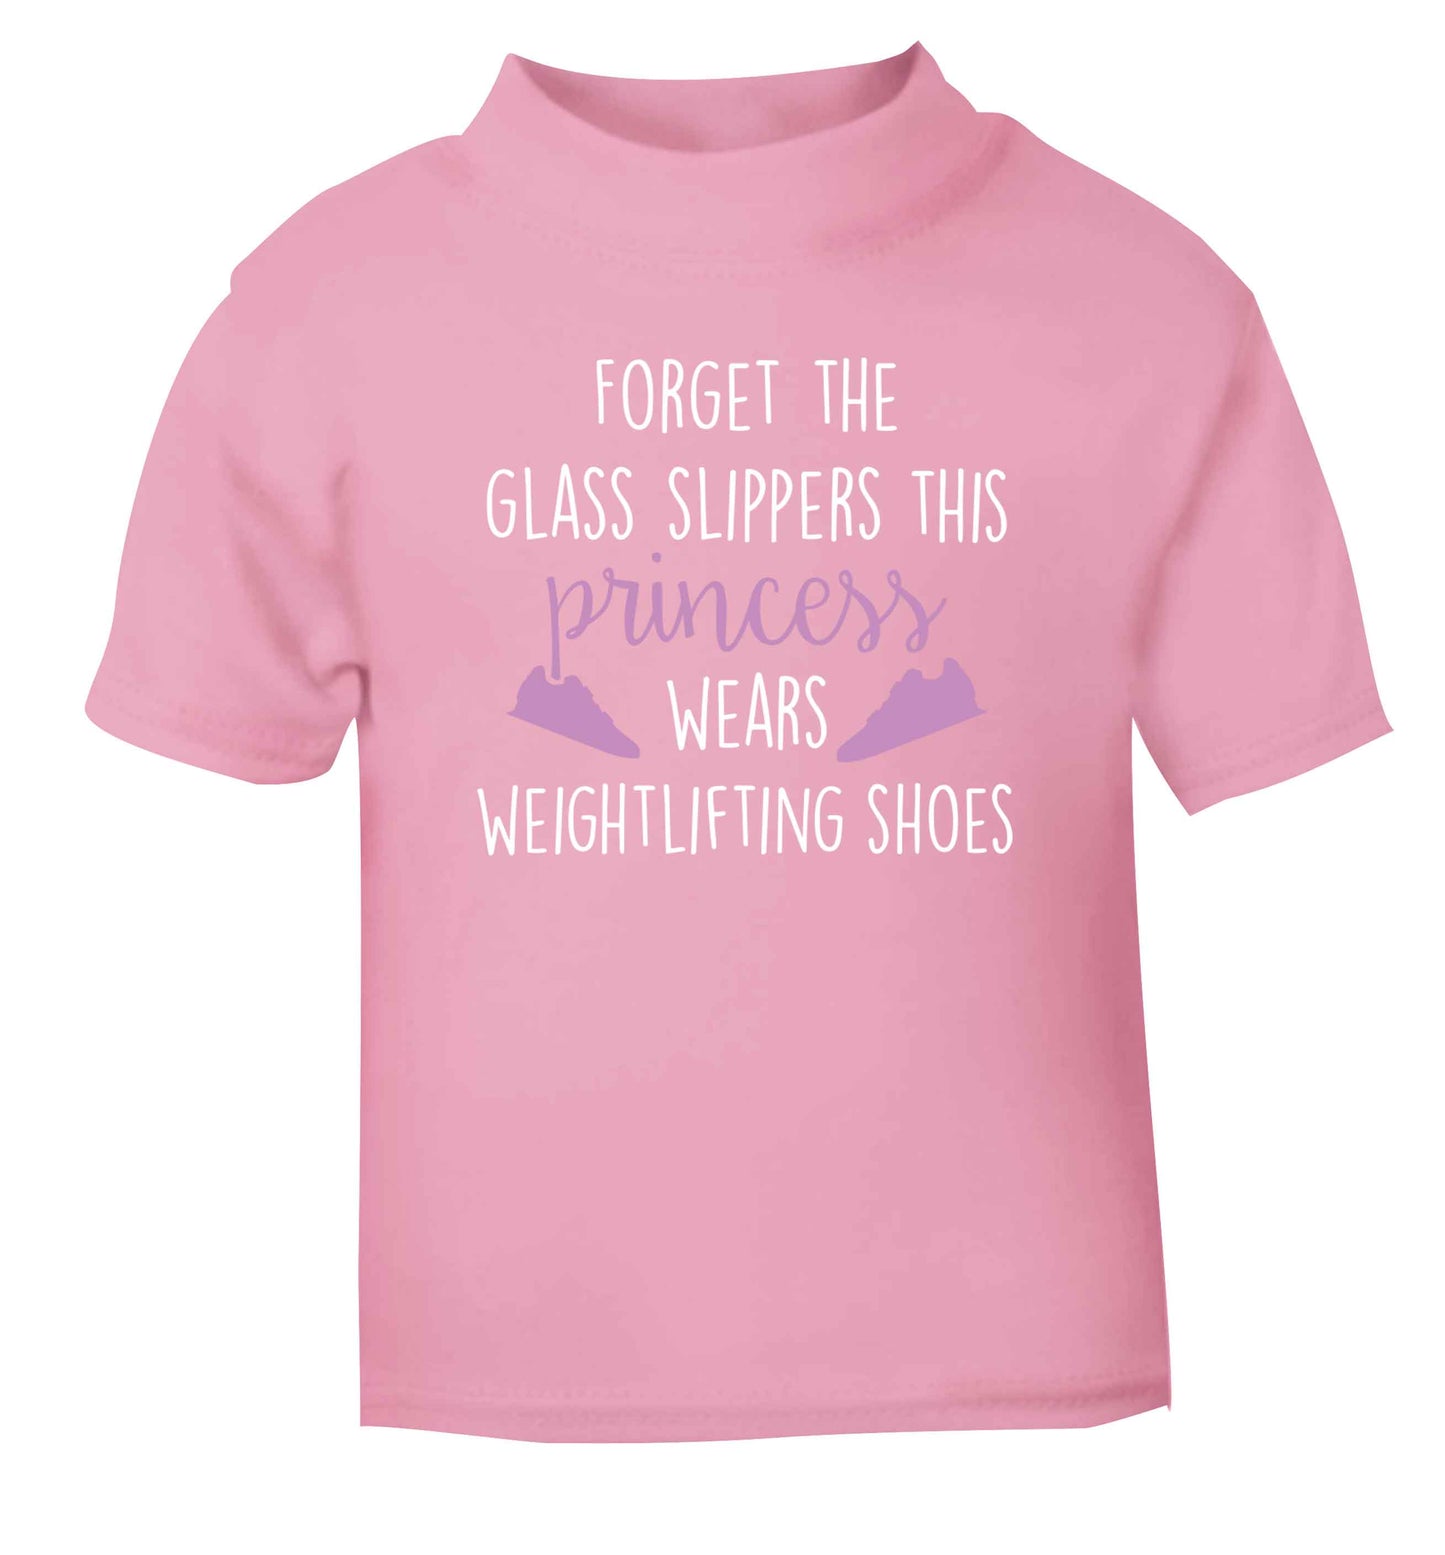 Forget the glass slippers this princess wears weightlifting shoes light pink Baby Toddler Tshirt 2 Years